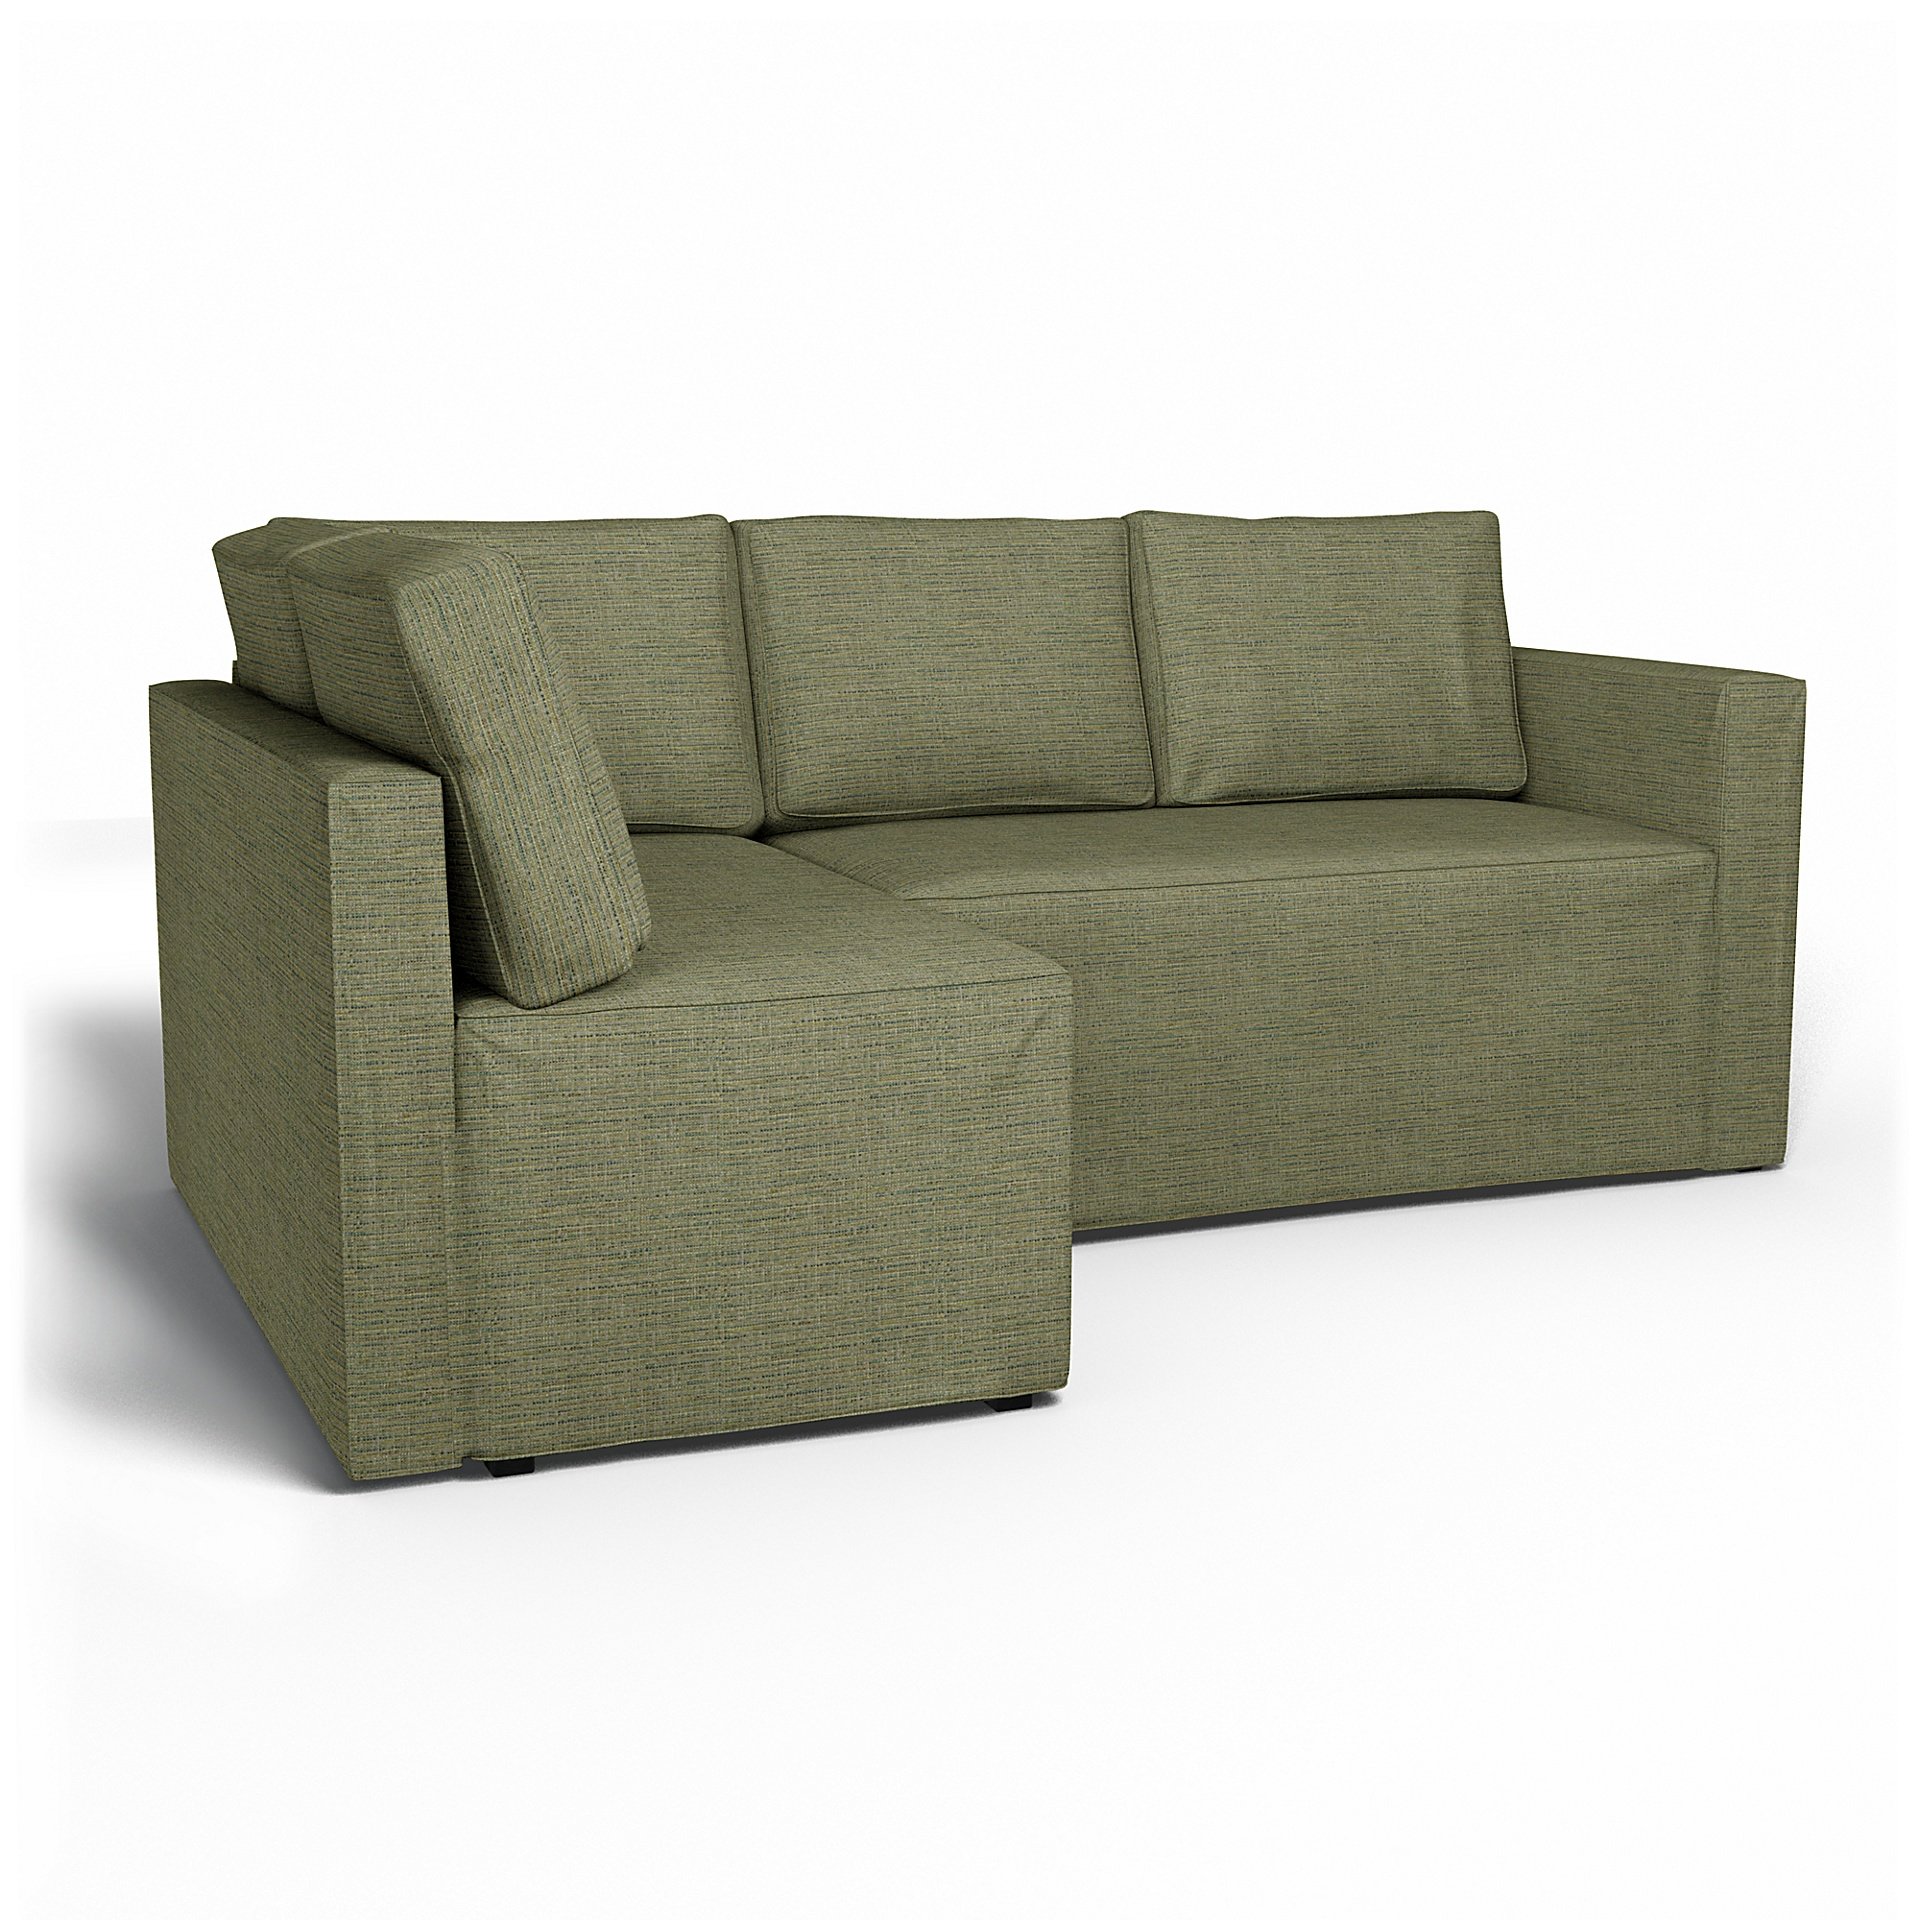 IKEA - Fagelbo Sofa Bed with Left Chaise Cover, Meadow Green, Boucle & Texture - Bemz